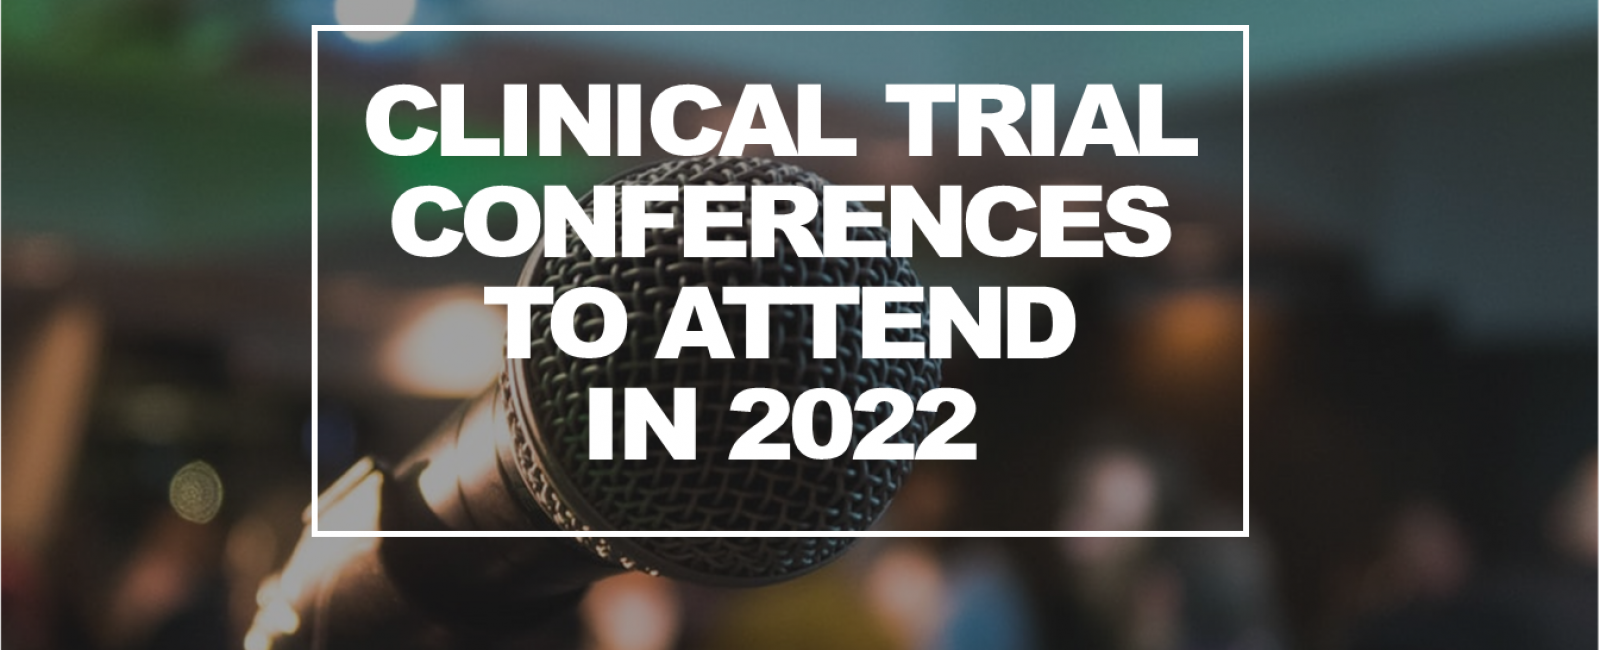 Clinical Trial Conferences to attend in 2022